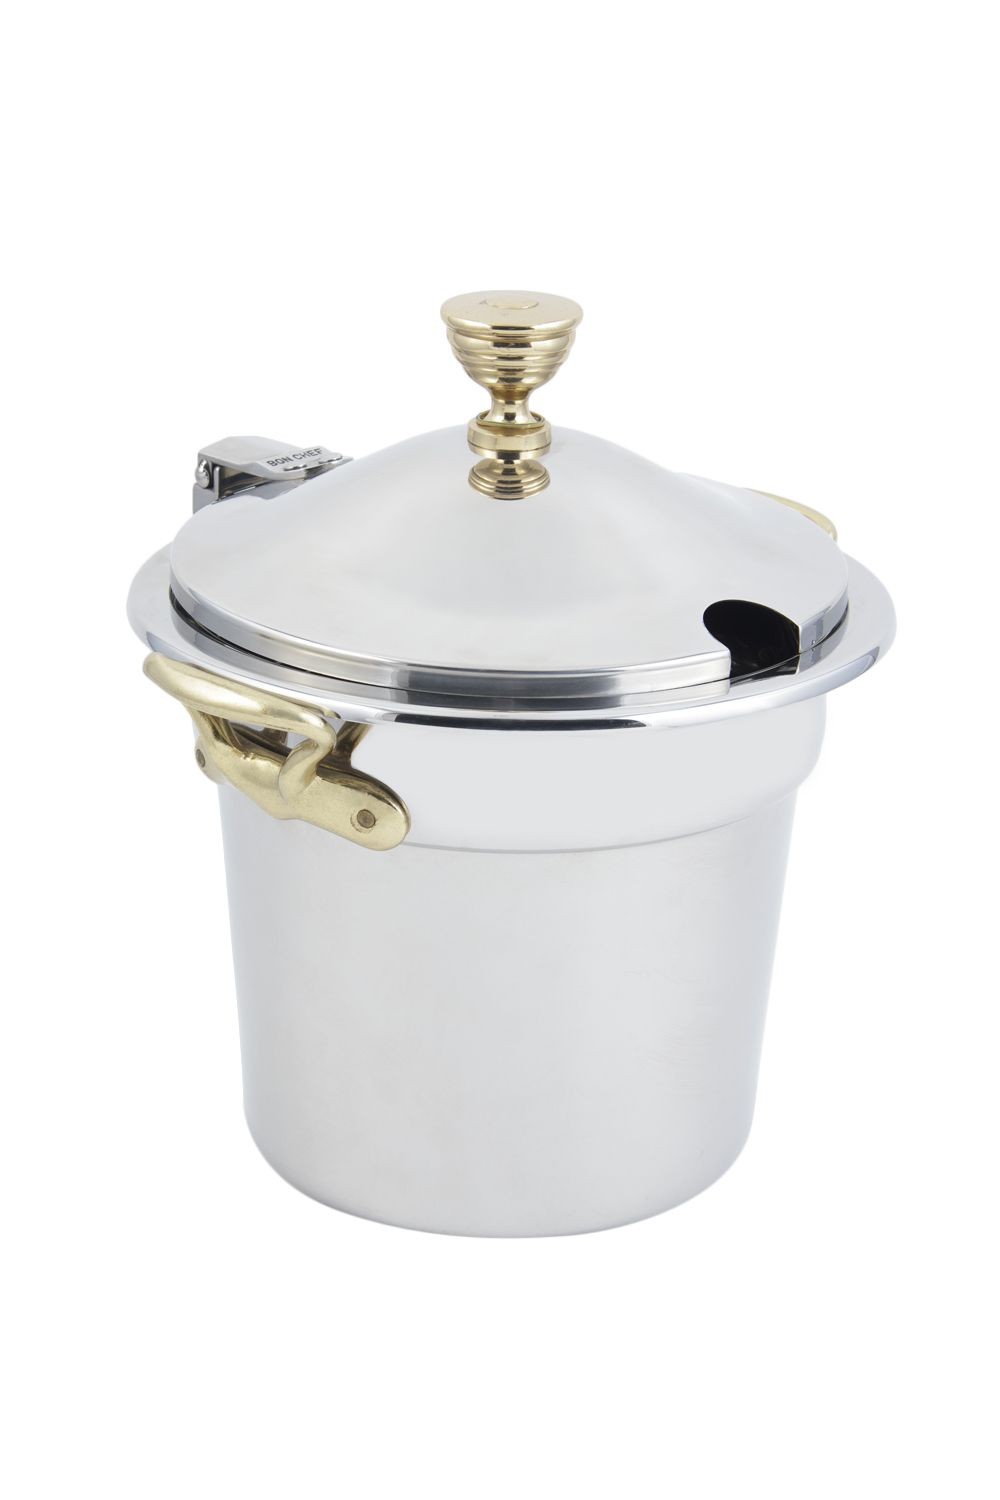 Bon Chef 5211WHCHR Plain Design Soup Tureen with Hinged Cover and Round Brass Handles, 7 Qt. 1 Pt.